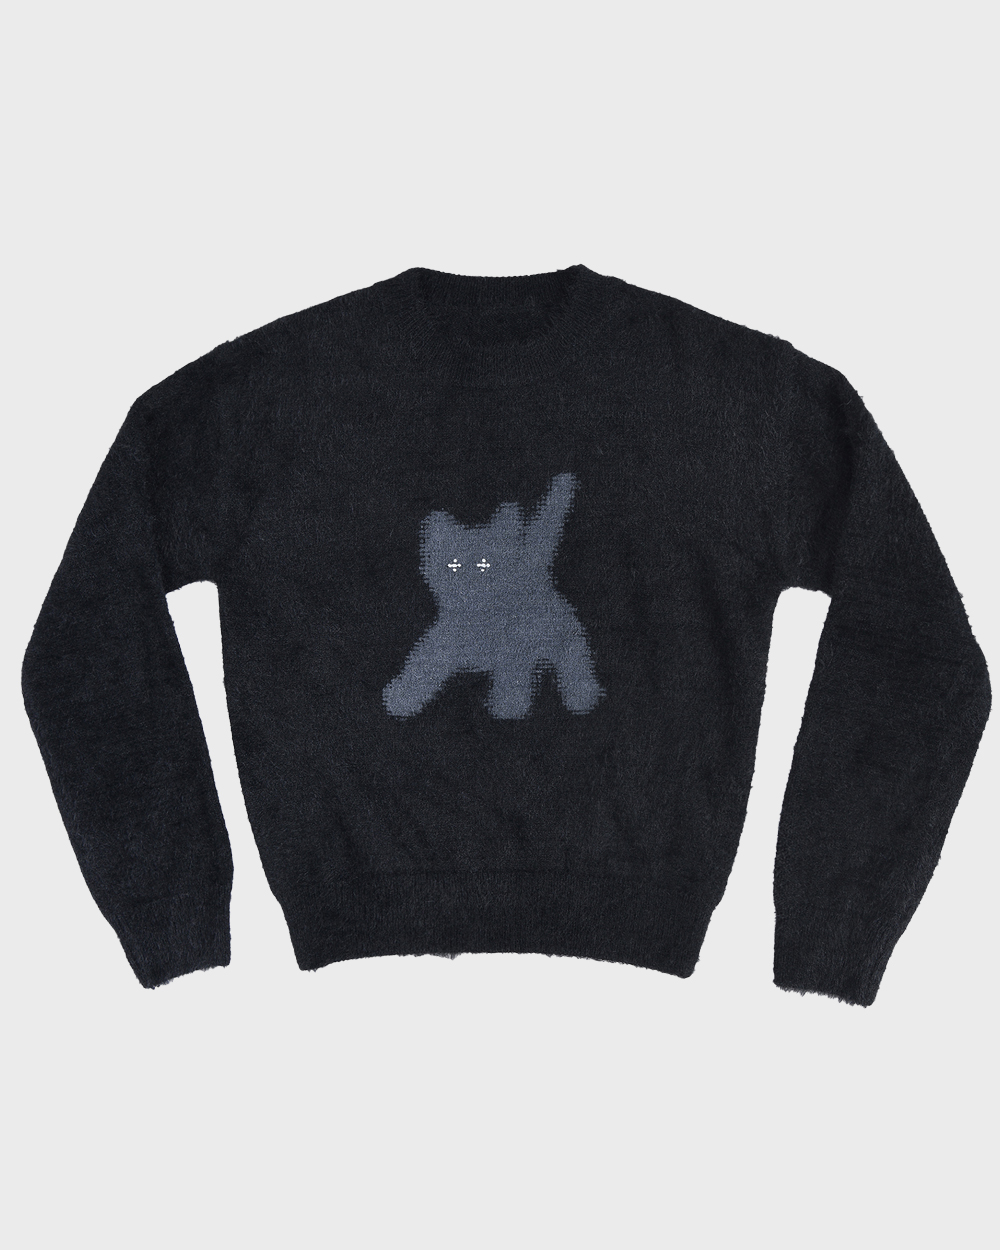 aeae Flashed cats angora knit_Loosed (Black) *10/4 발송 예정*